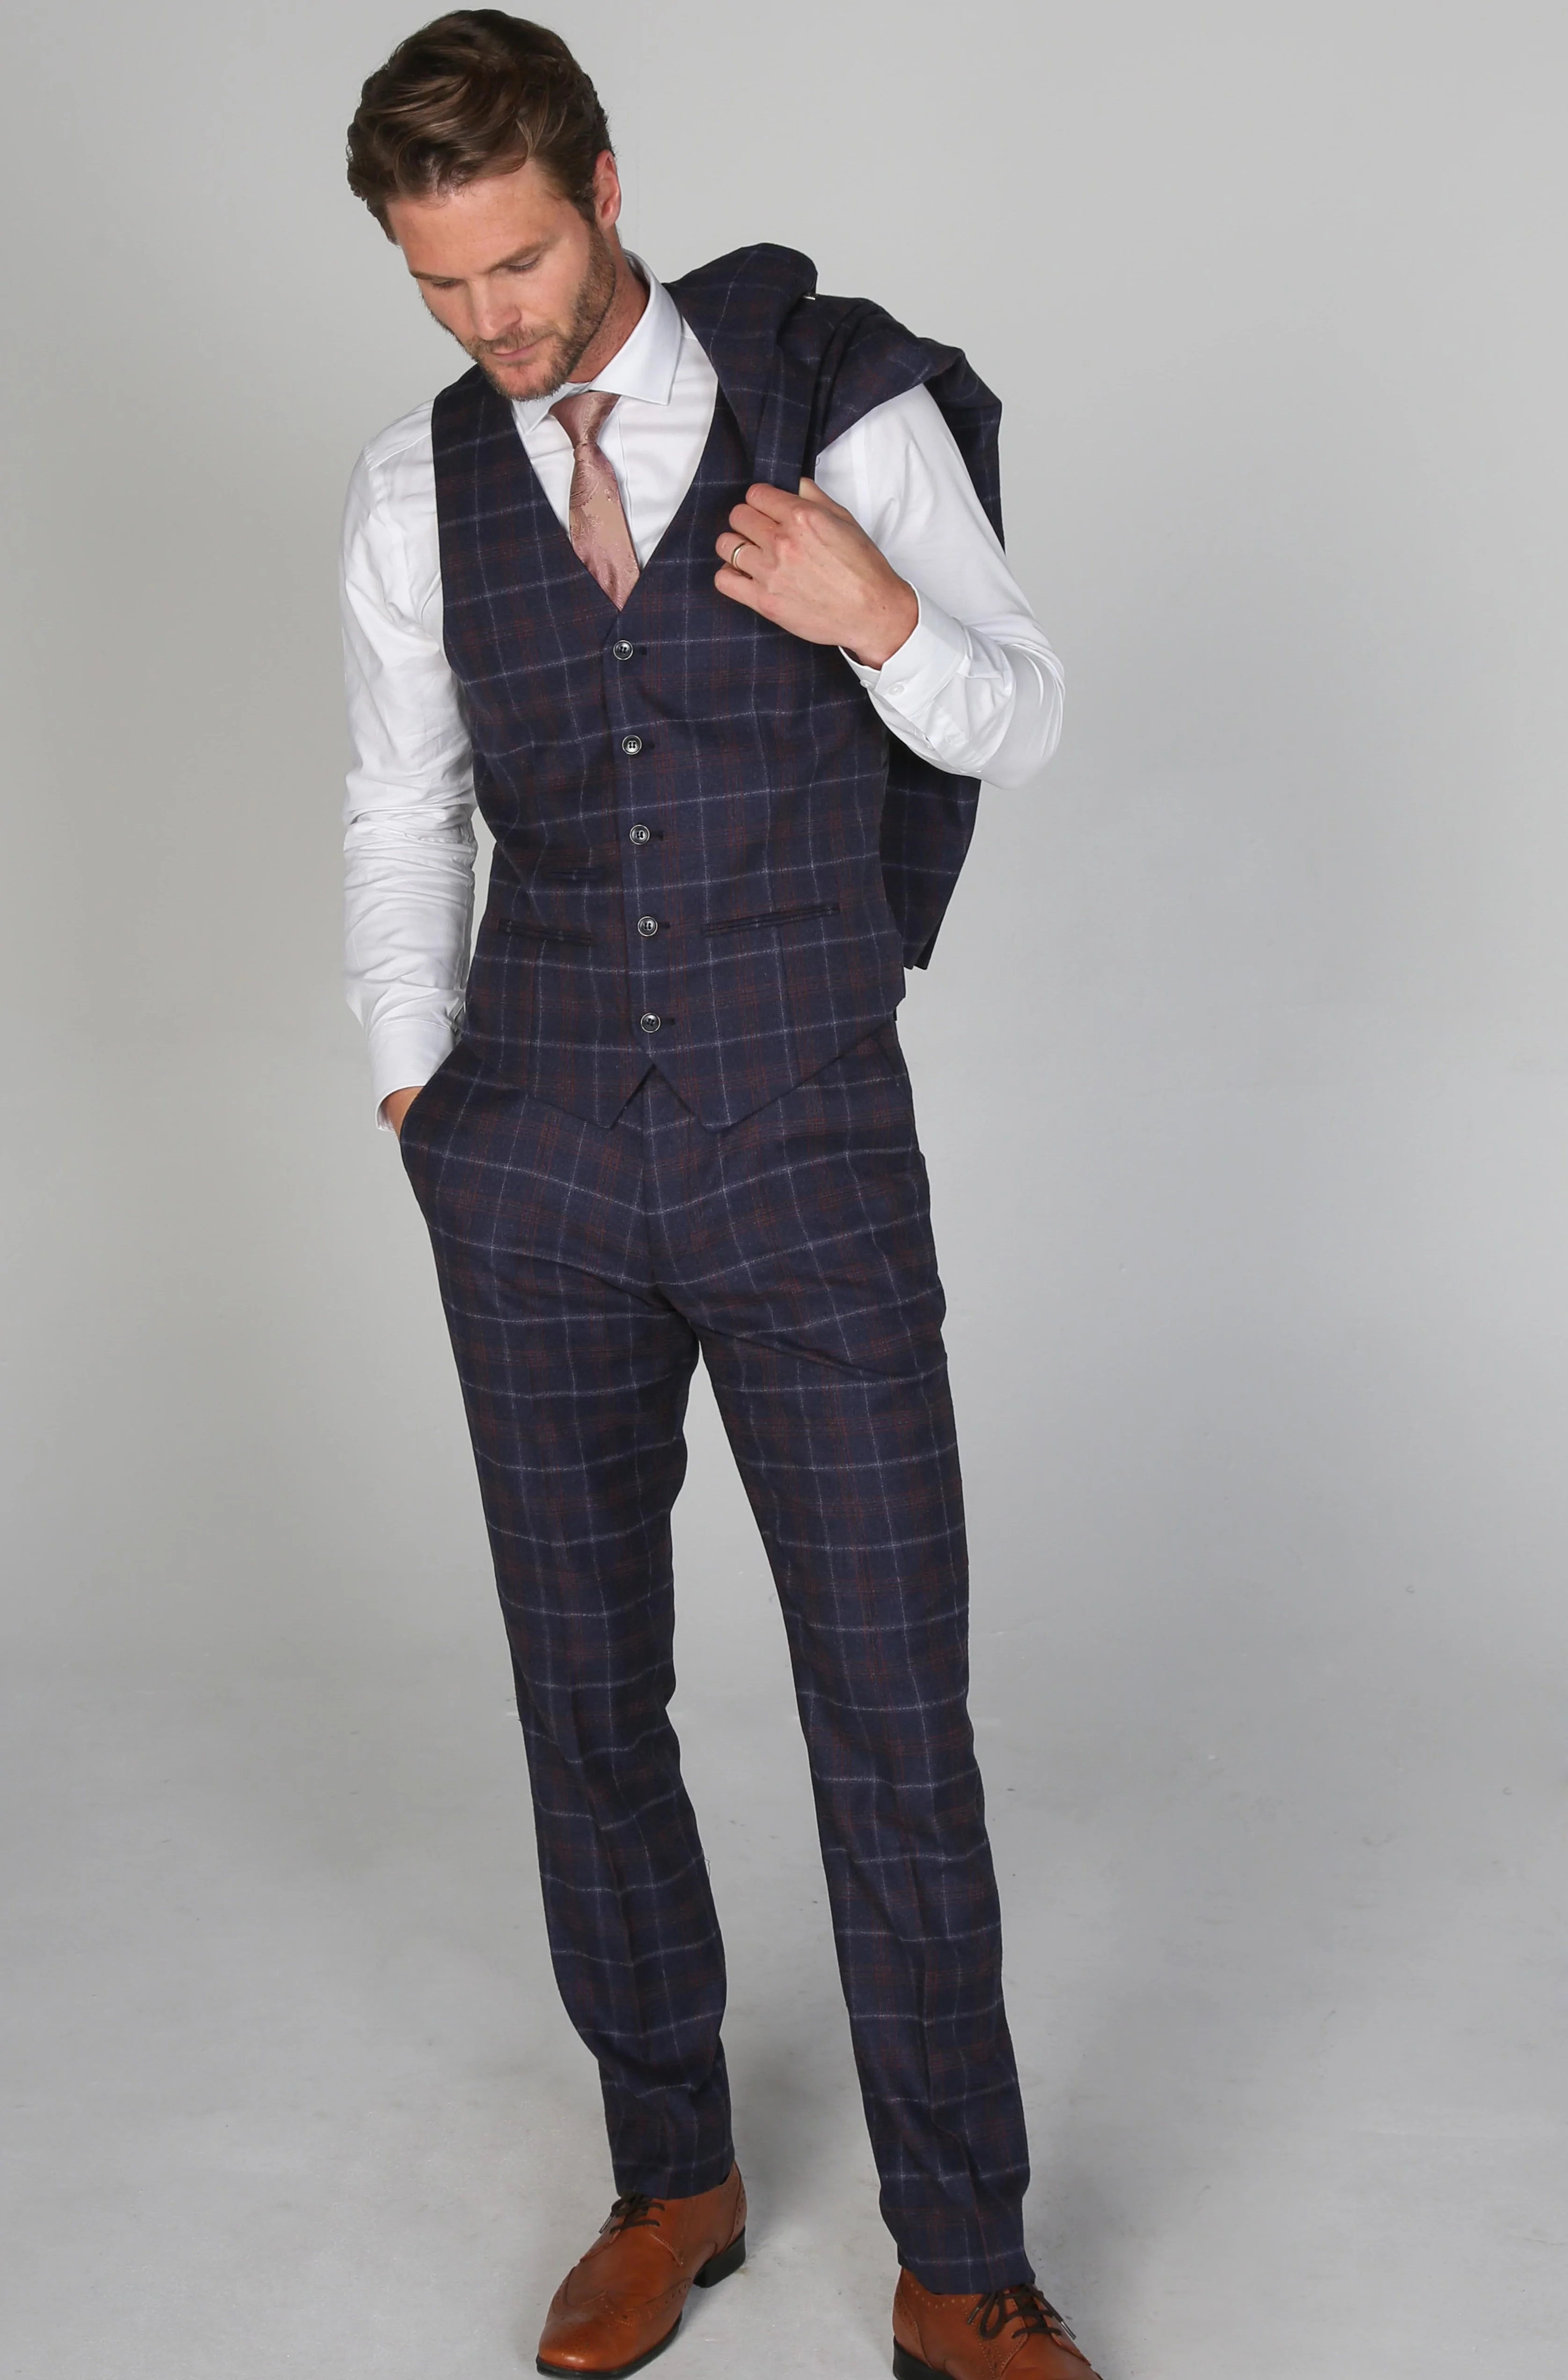 Kenneth Navy Tweed Check Suit By Paul Andrew